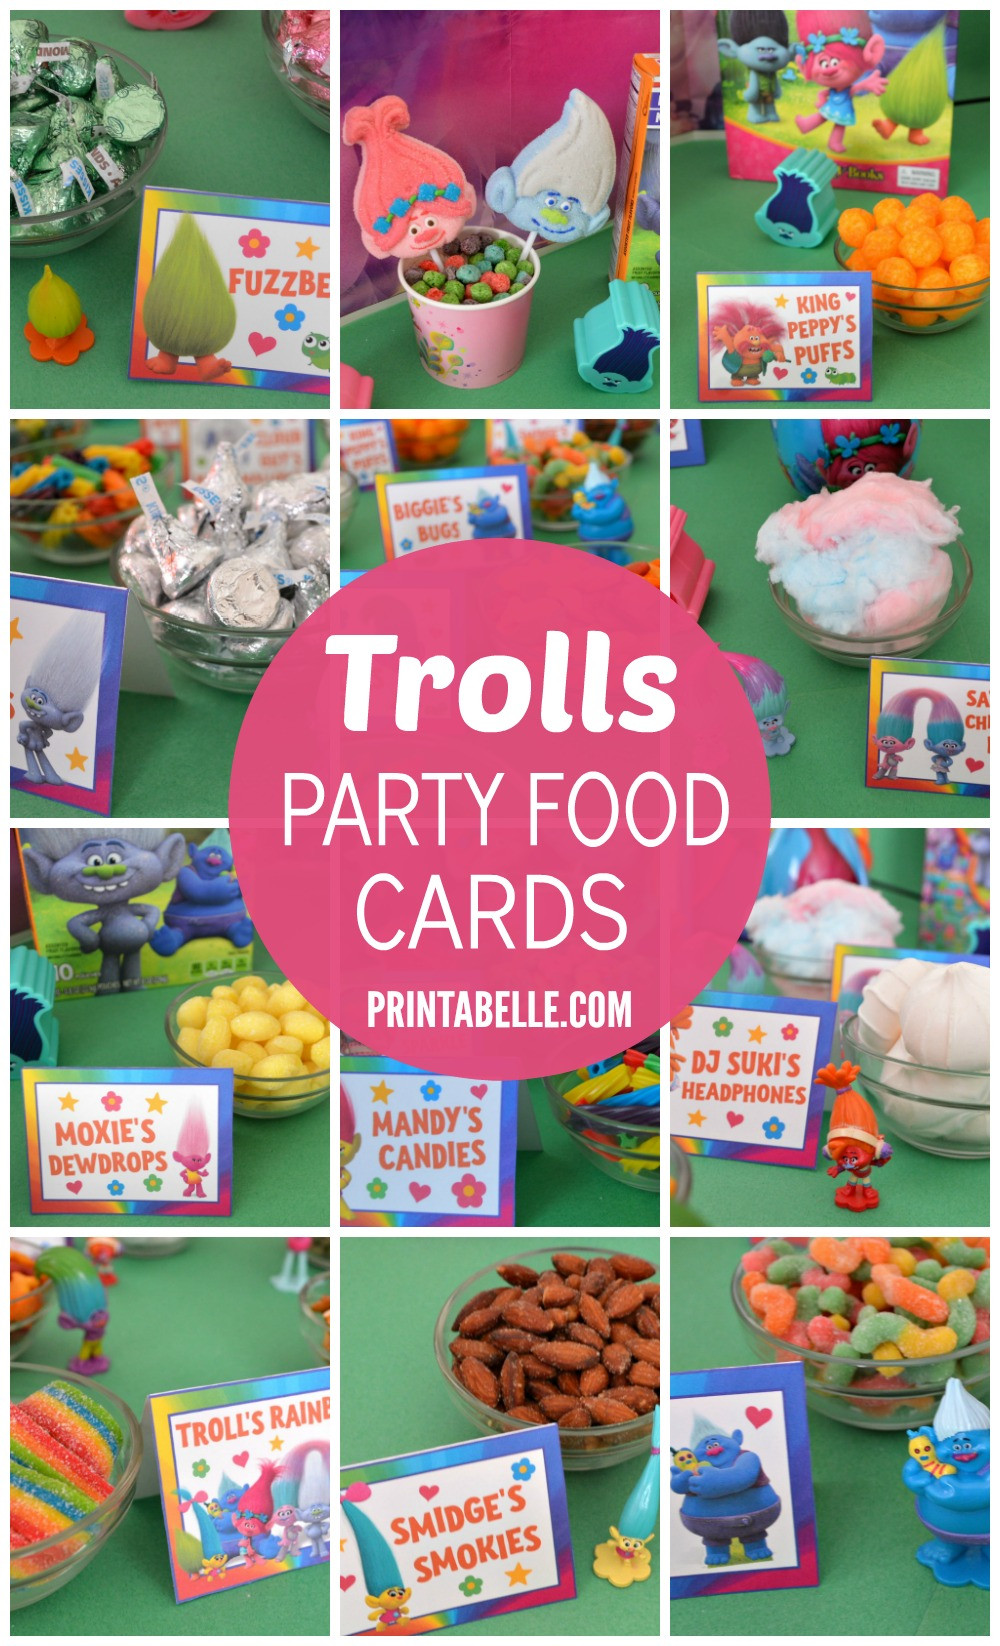 Fun Troll Movie Party Food Ideas
 Trolls Party Food Card Set – Free Party Printables at